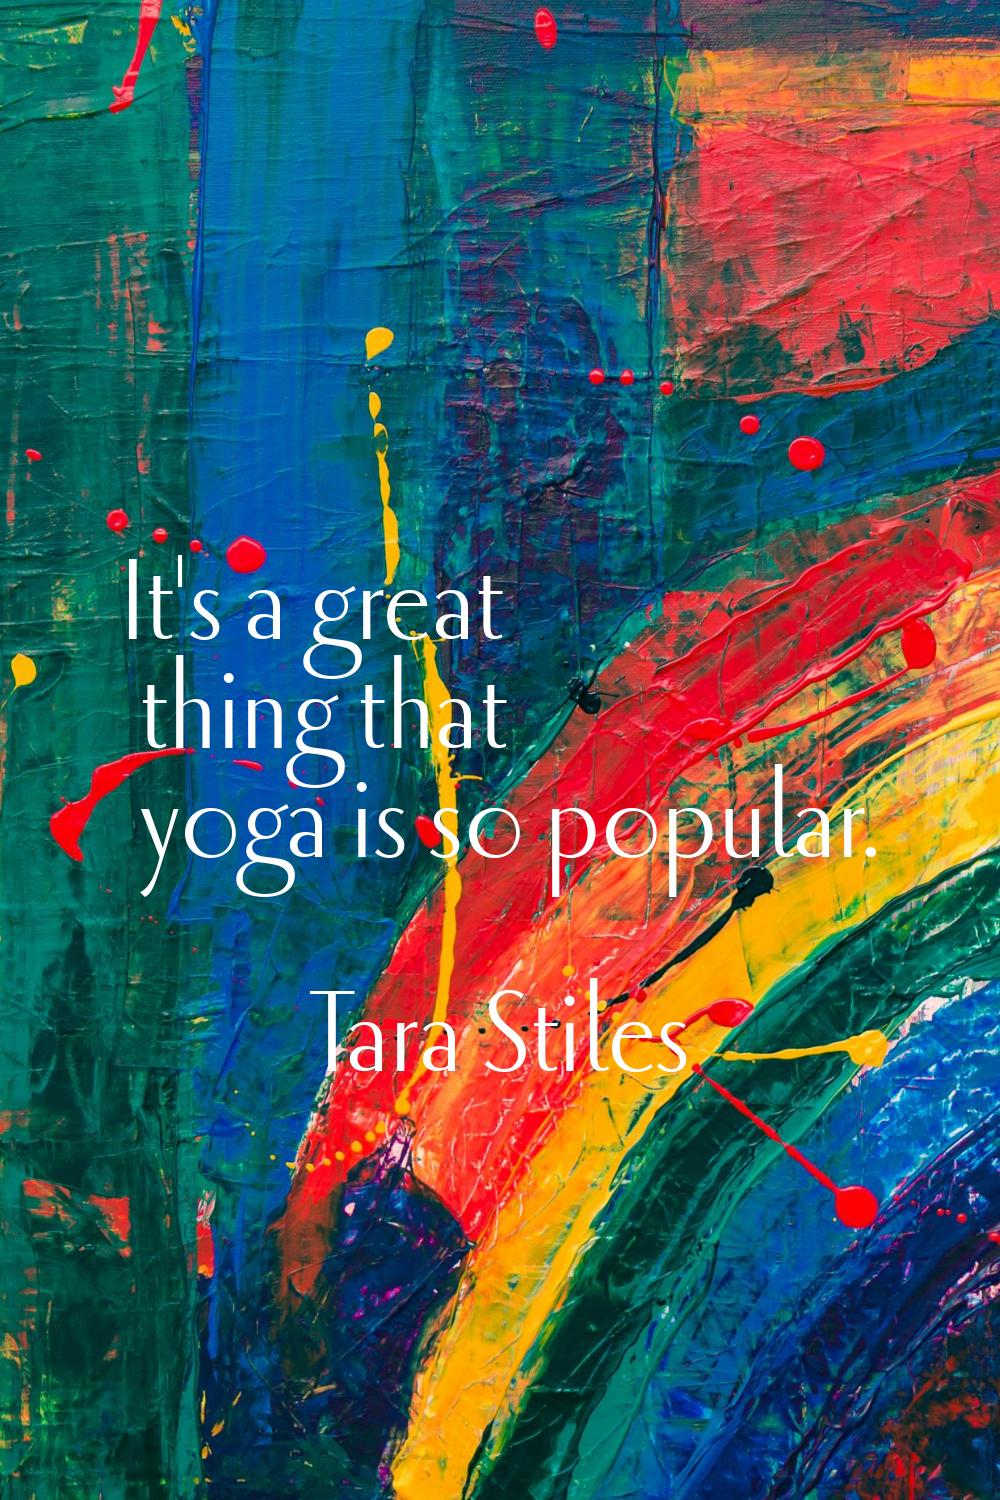 It's a great thing that yoga is so popular.